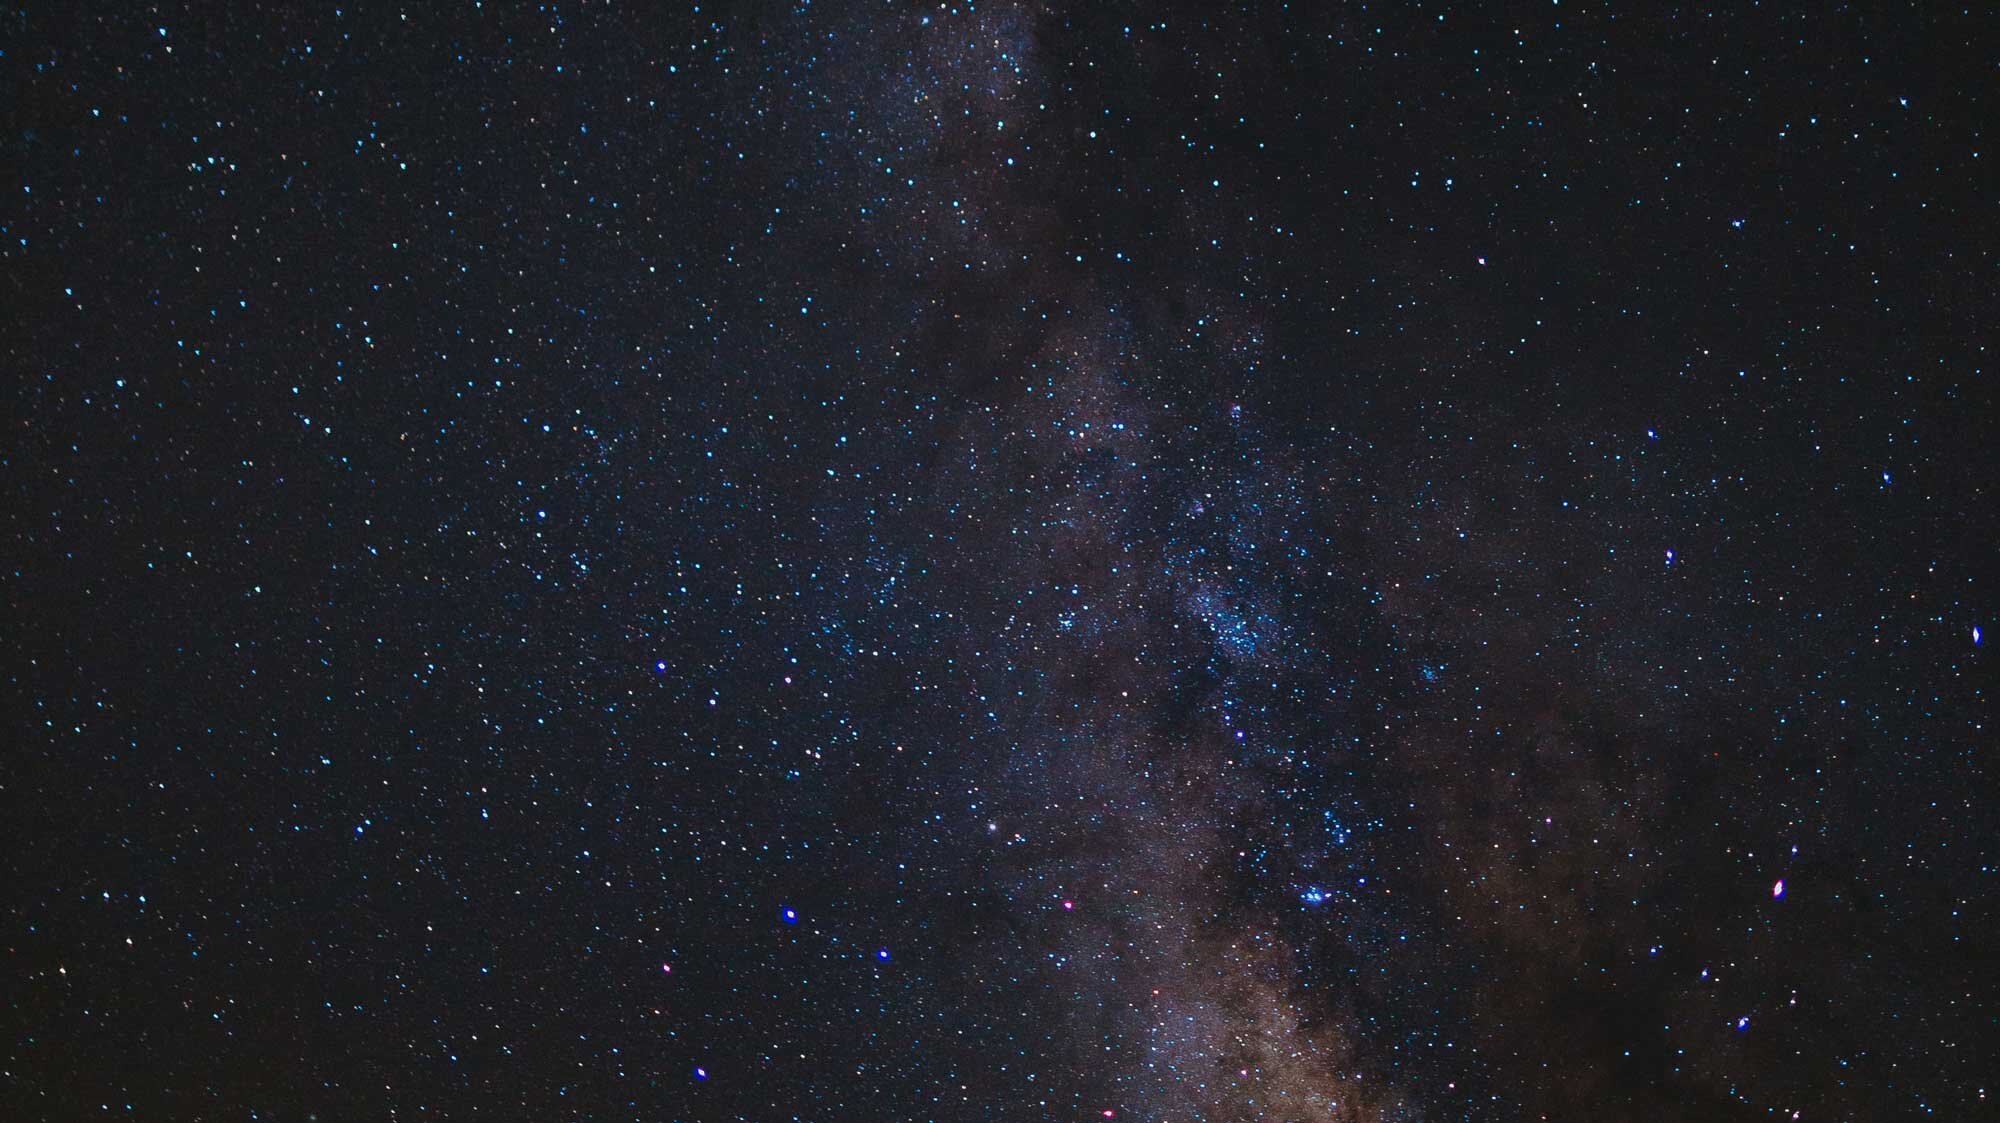 https://unsplash.com/photos/asuyh-_ZX54 Extreme Ultra High Vacuum; Part of the milky way